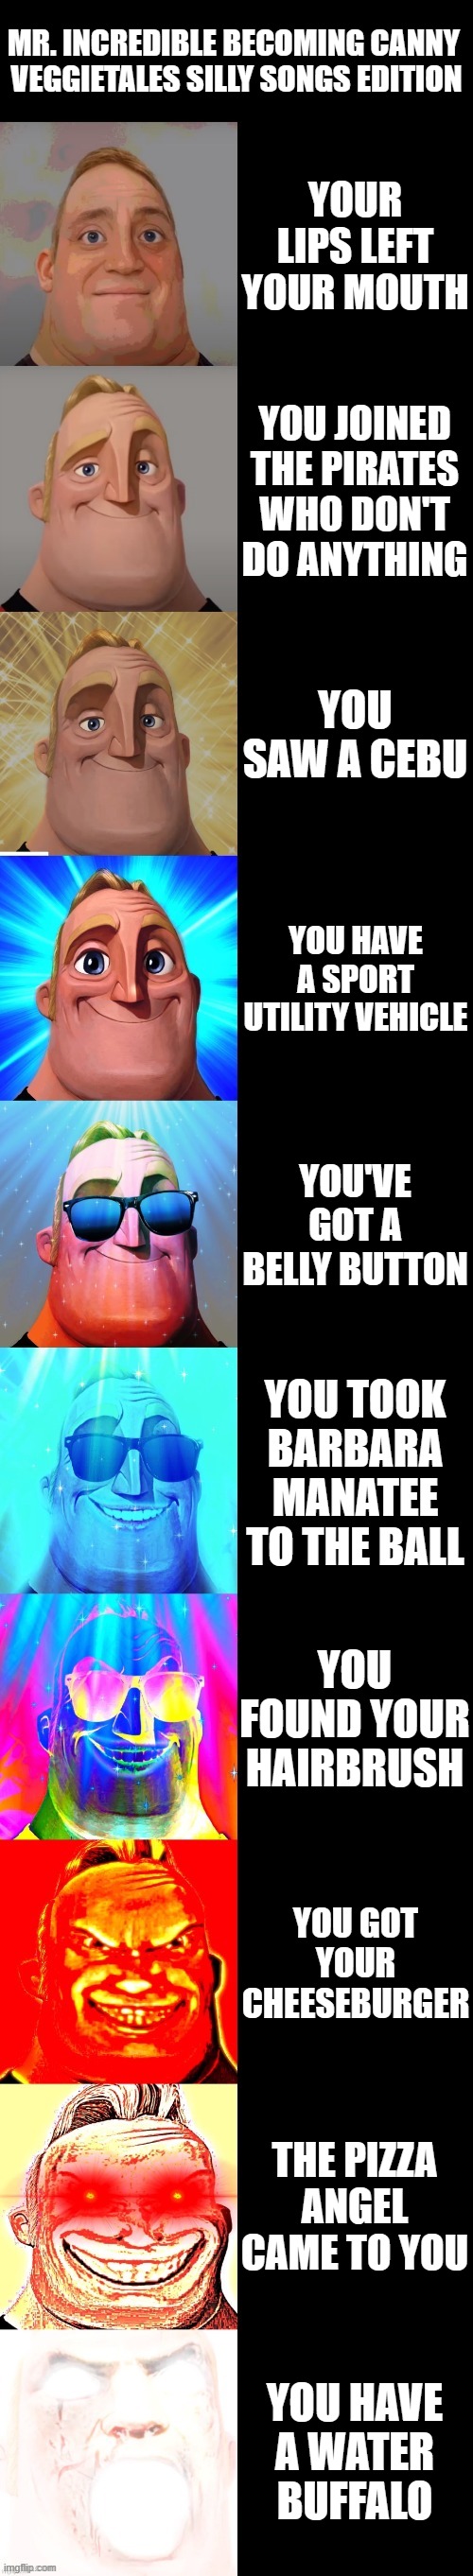 Mr. Incredible becoming canny - VeggieTales Silly Songs edition | MR. INCREDIBLE BECOMING CANNY 
VEGGIETALES SILLY SONGS EDITION; YOUR LIPS LEFT YOUR MOUTH; YOU JOINED THE PIRATES WHO DON'T DO ANYTHING; YOU SAW A CEBU; YOU HAVE A SPORT UTILITY VEHICLE; YOU'VE GOT A BELLY BUTTON; YOU TOOK BARBARA MANATEE TO THE BALL; YOU FOUND YOUR HAIRBRUSH; YOU GOT YOUR CHEESEBURGER; THE PIZZA ANGEL CAME TO YOU; YOU HAVE A WATER BUFFALO | image tagged in mr incredible becoming canny,veggietales | made w/ Imgflip meme maker